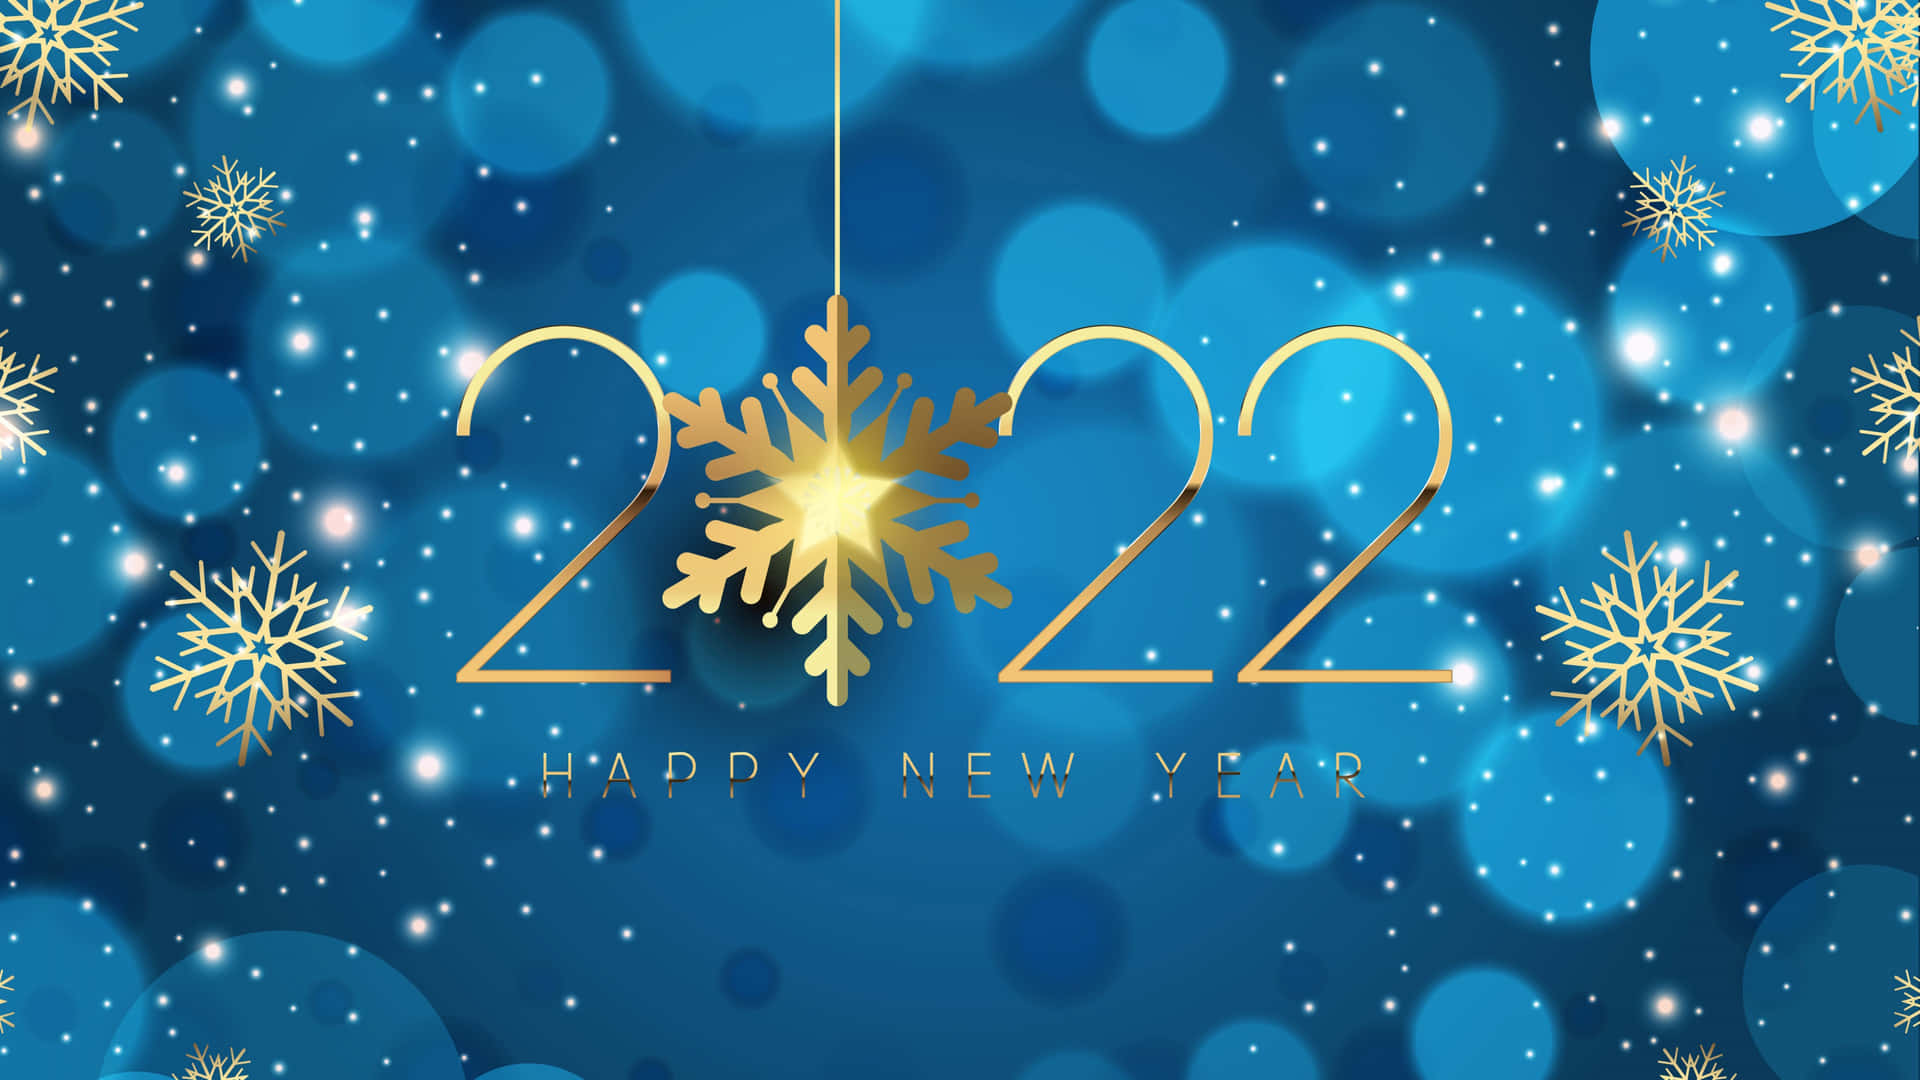 Happy New Year 2022 Background Wallpaper